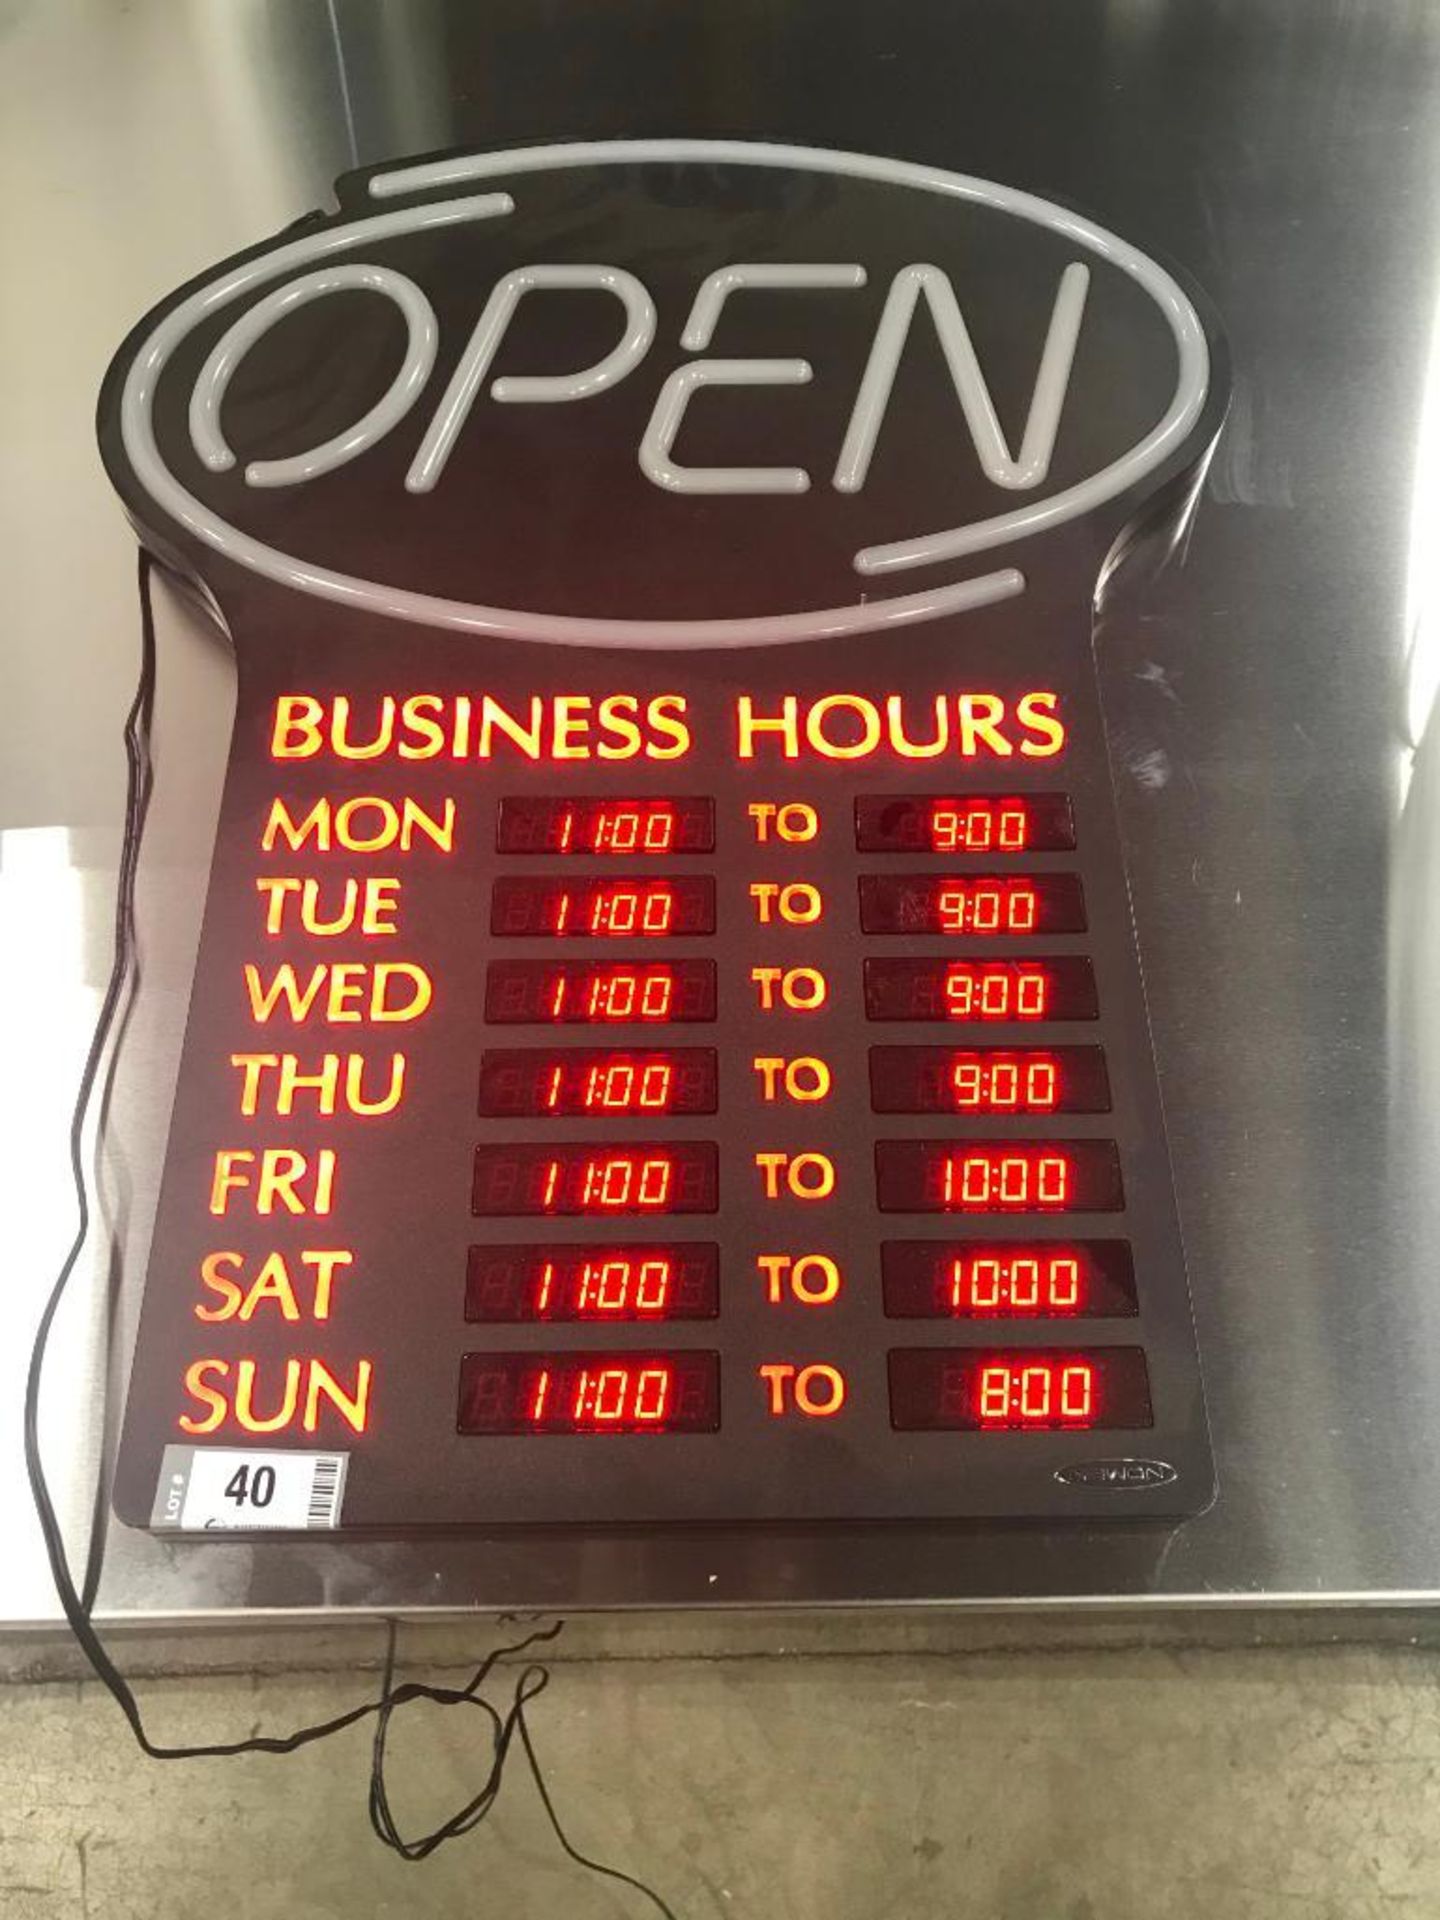 NEWON LED OPEN SIGN WITH PROGRAMMABLE BUSINESS HOURS AND FLASHING EFFECTS - Image 7 of 8